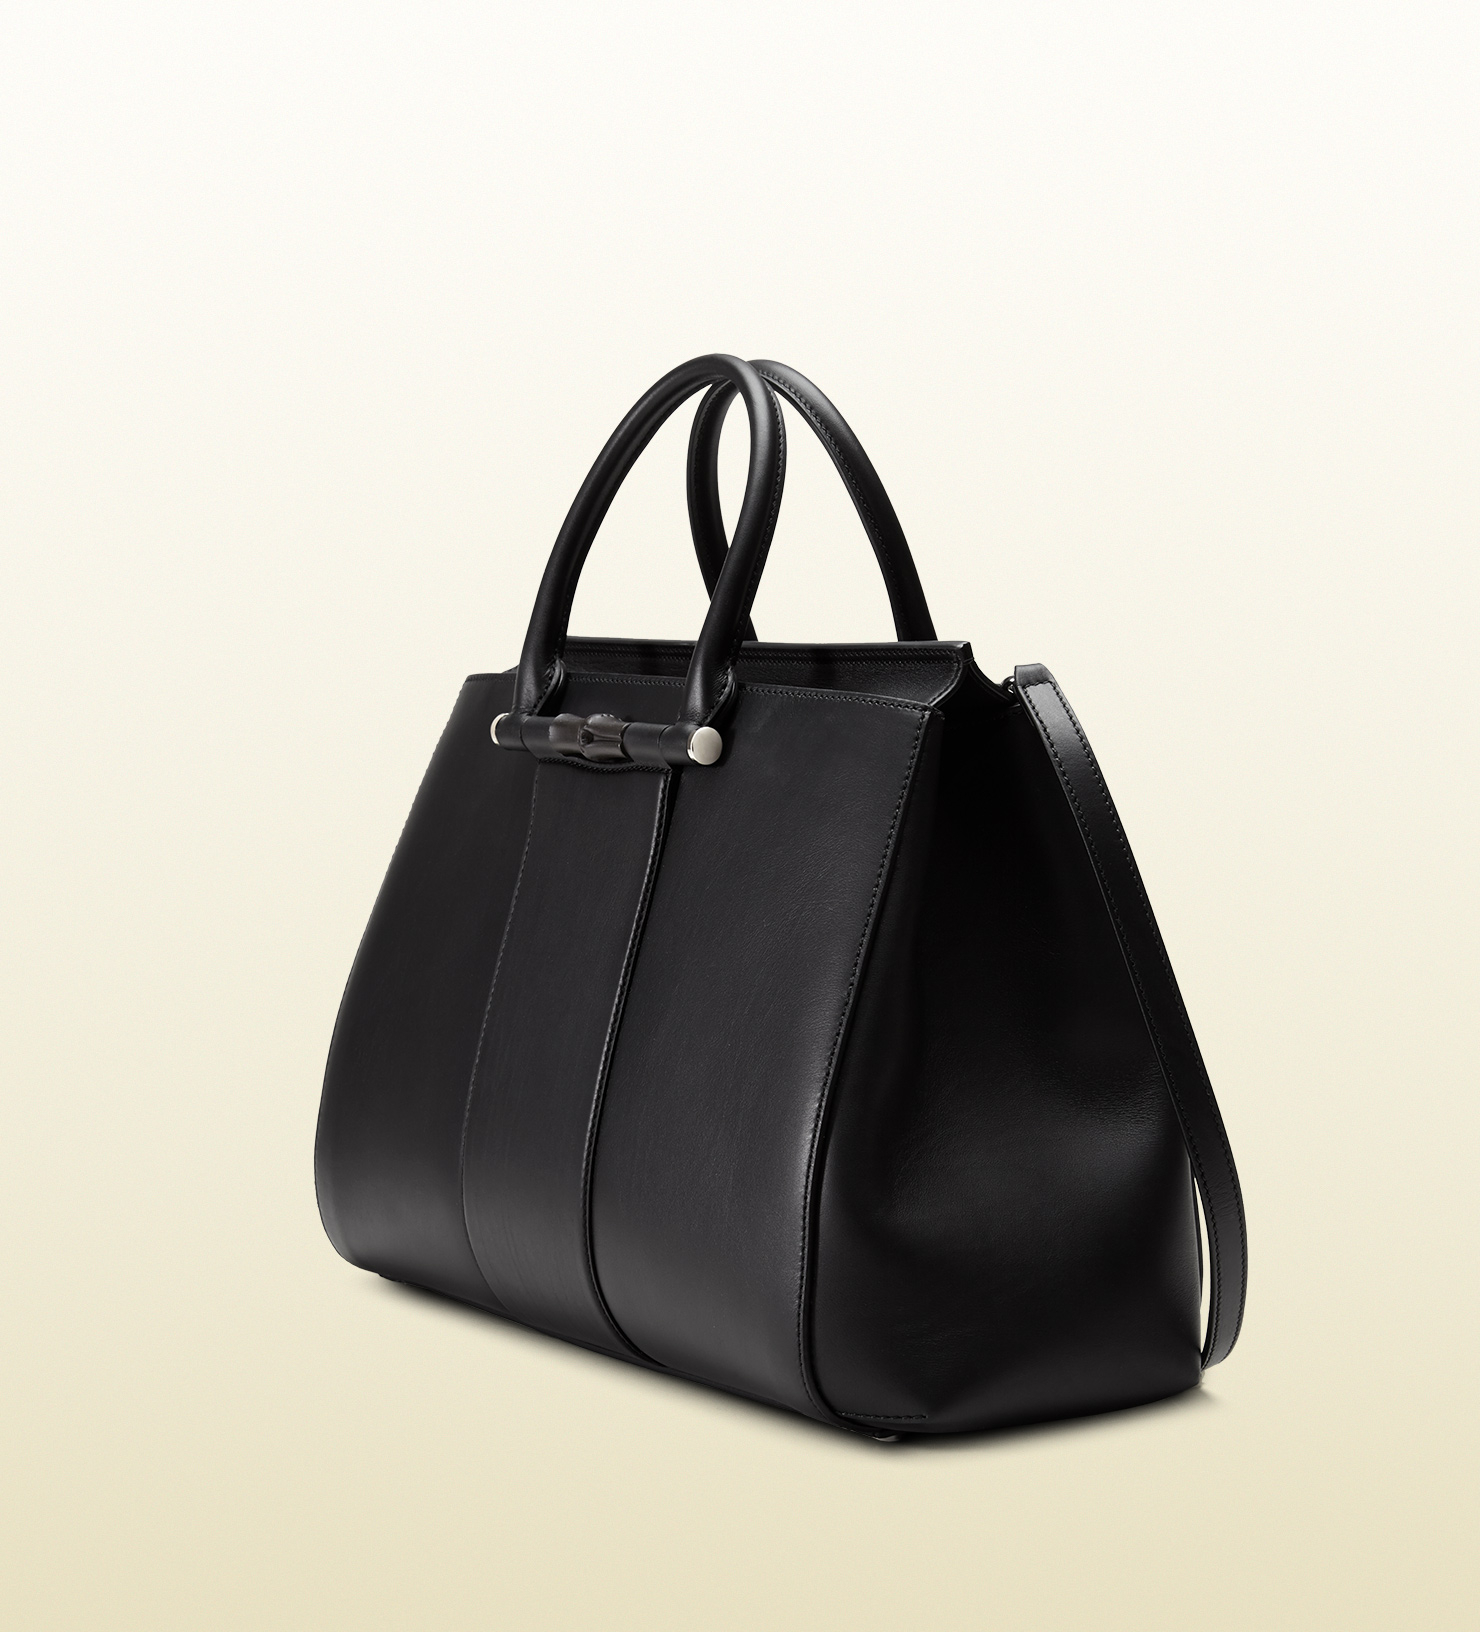 Lyst - Gucci Lady Bamboo Leather Top Handle Bag in Black